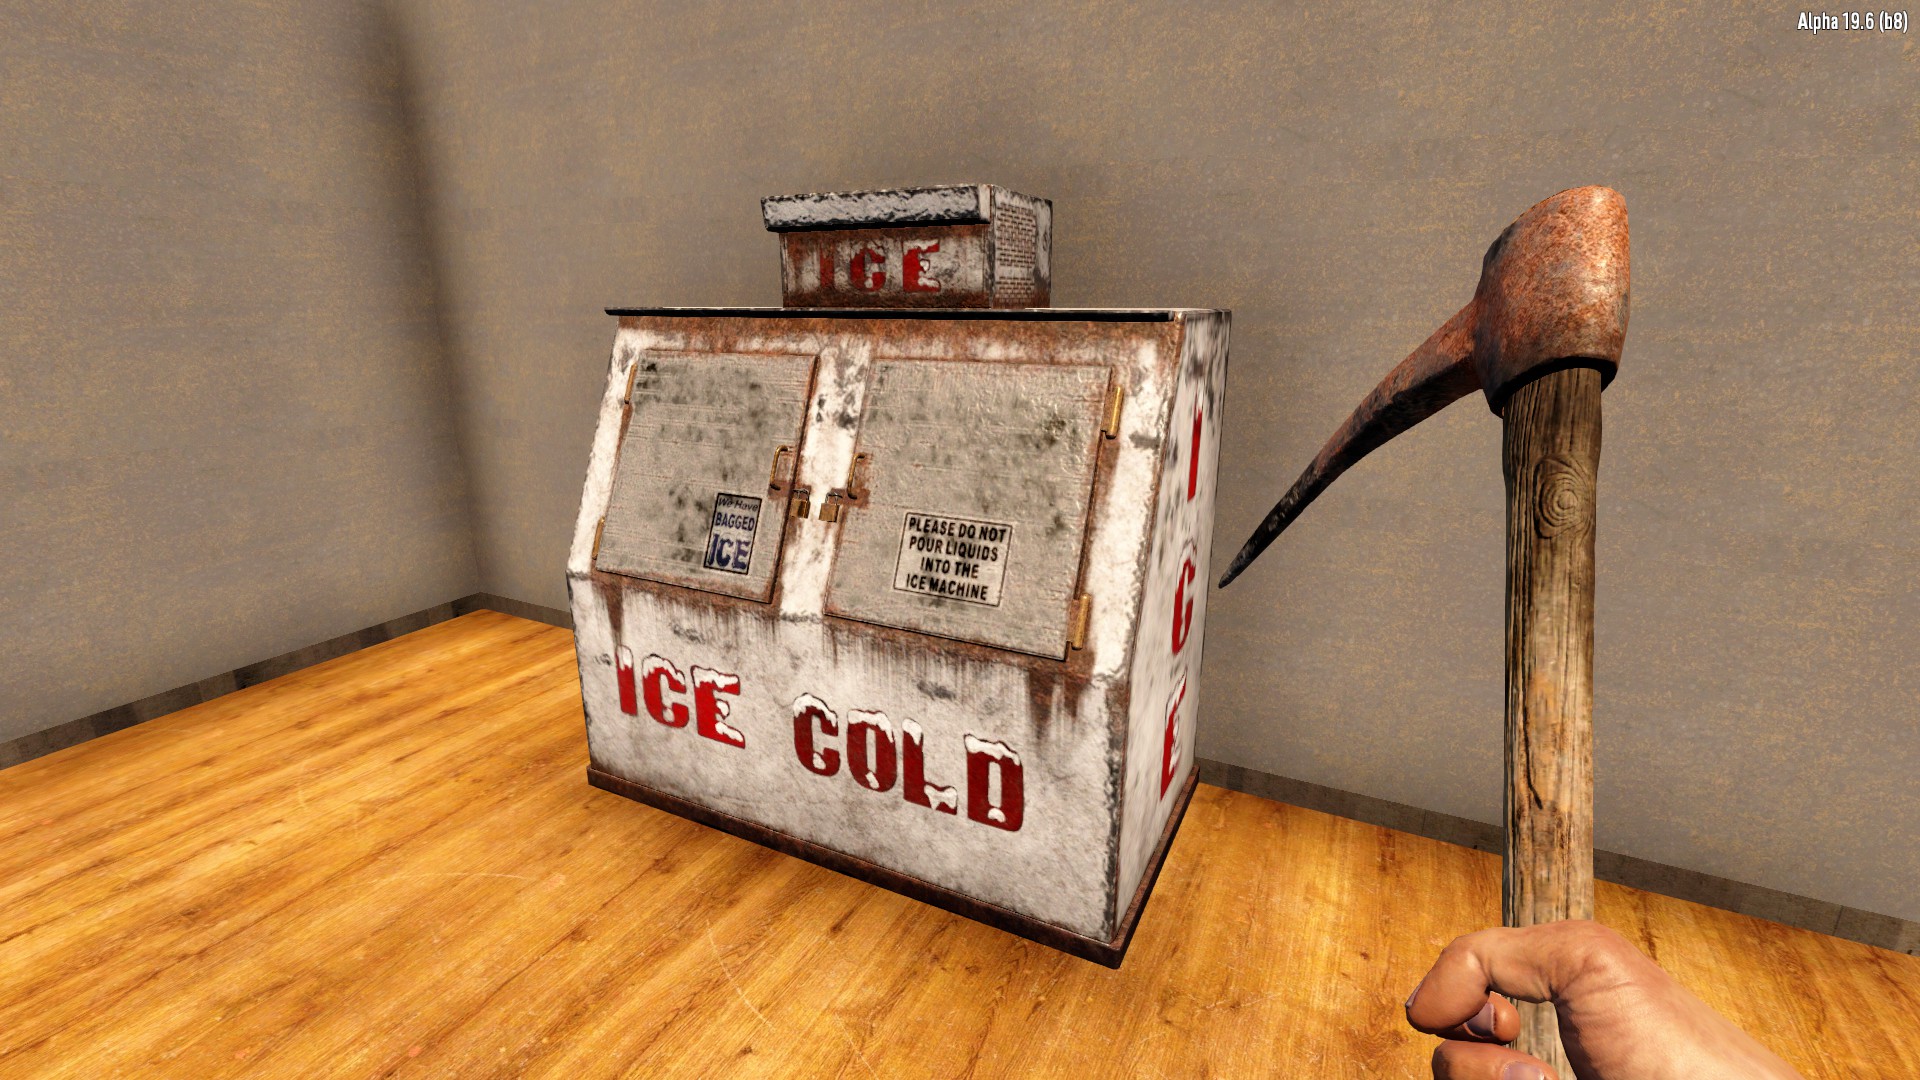 7 Days to Die - Best Gameplay Tips and Tricks - New Version: Alpha 19.6 - Tips - 4BC16FD